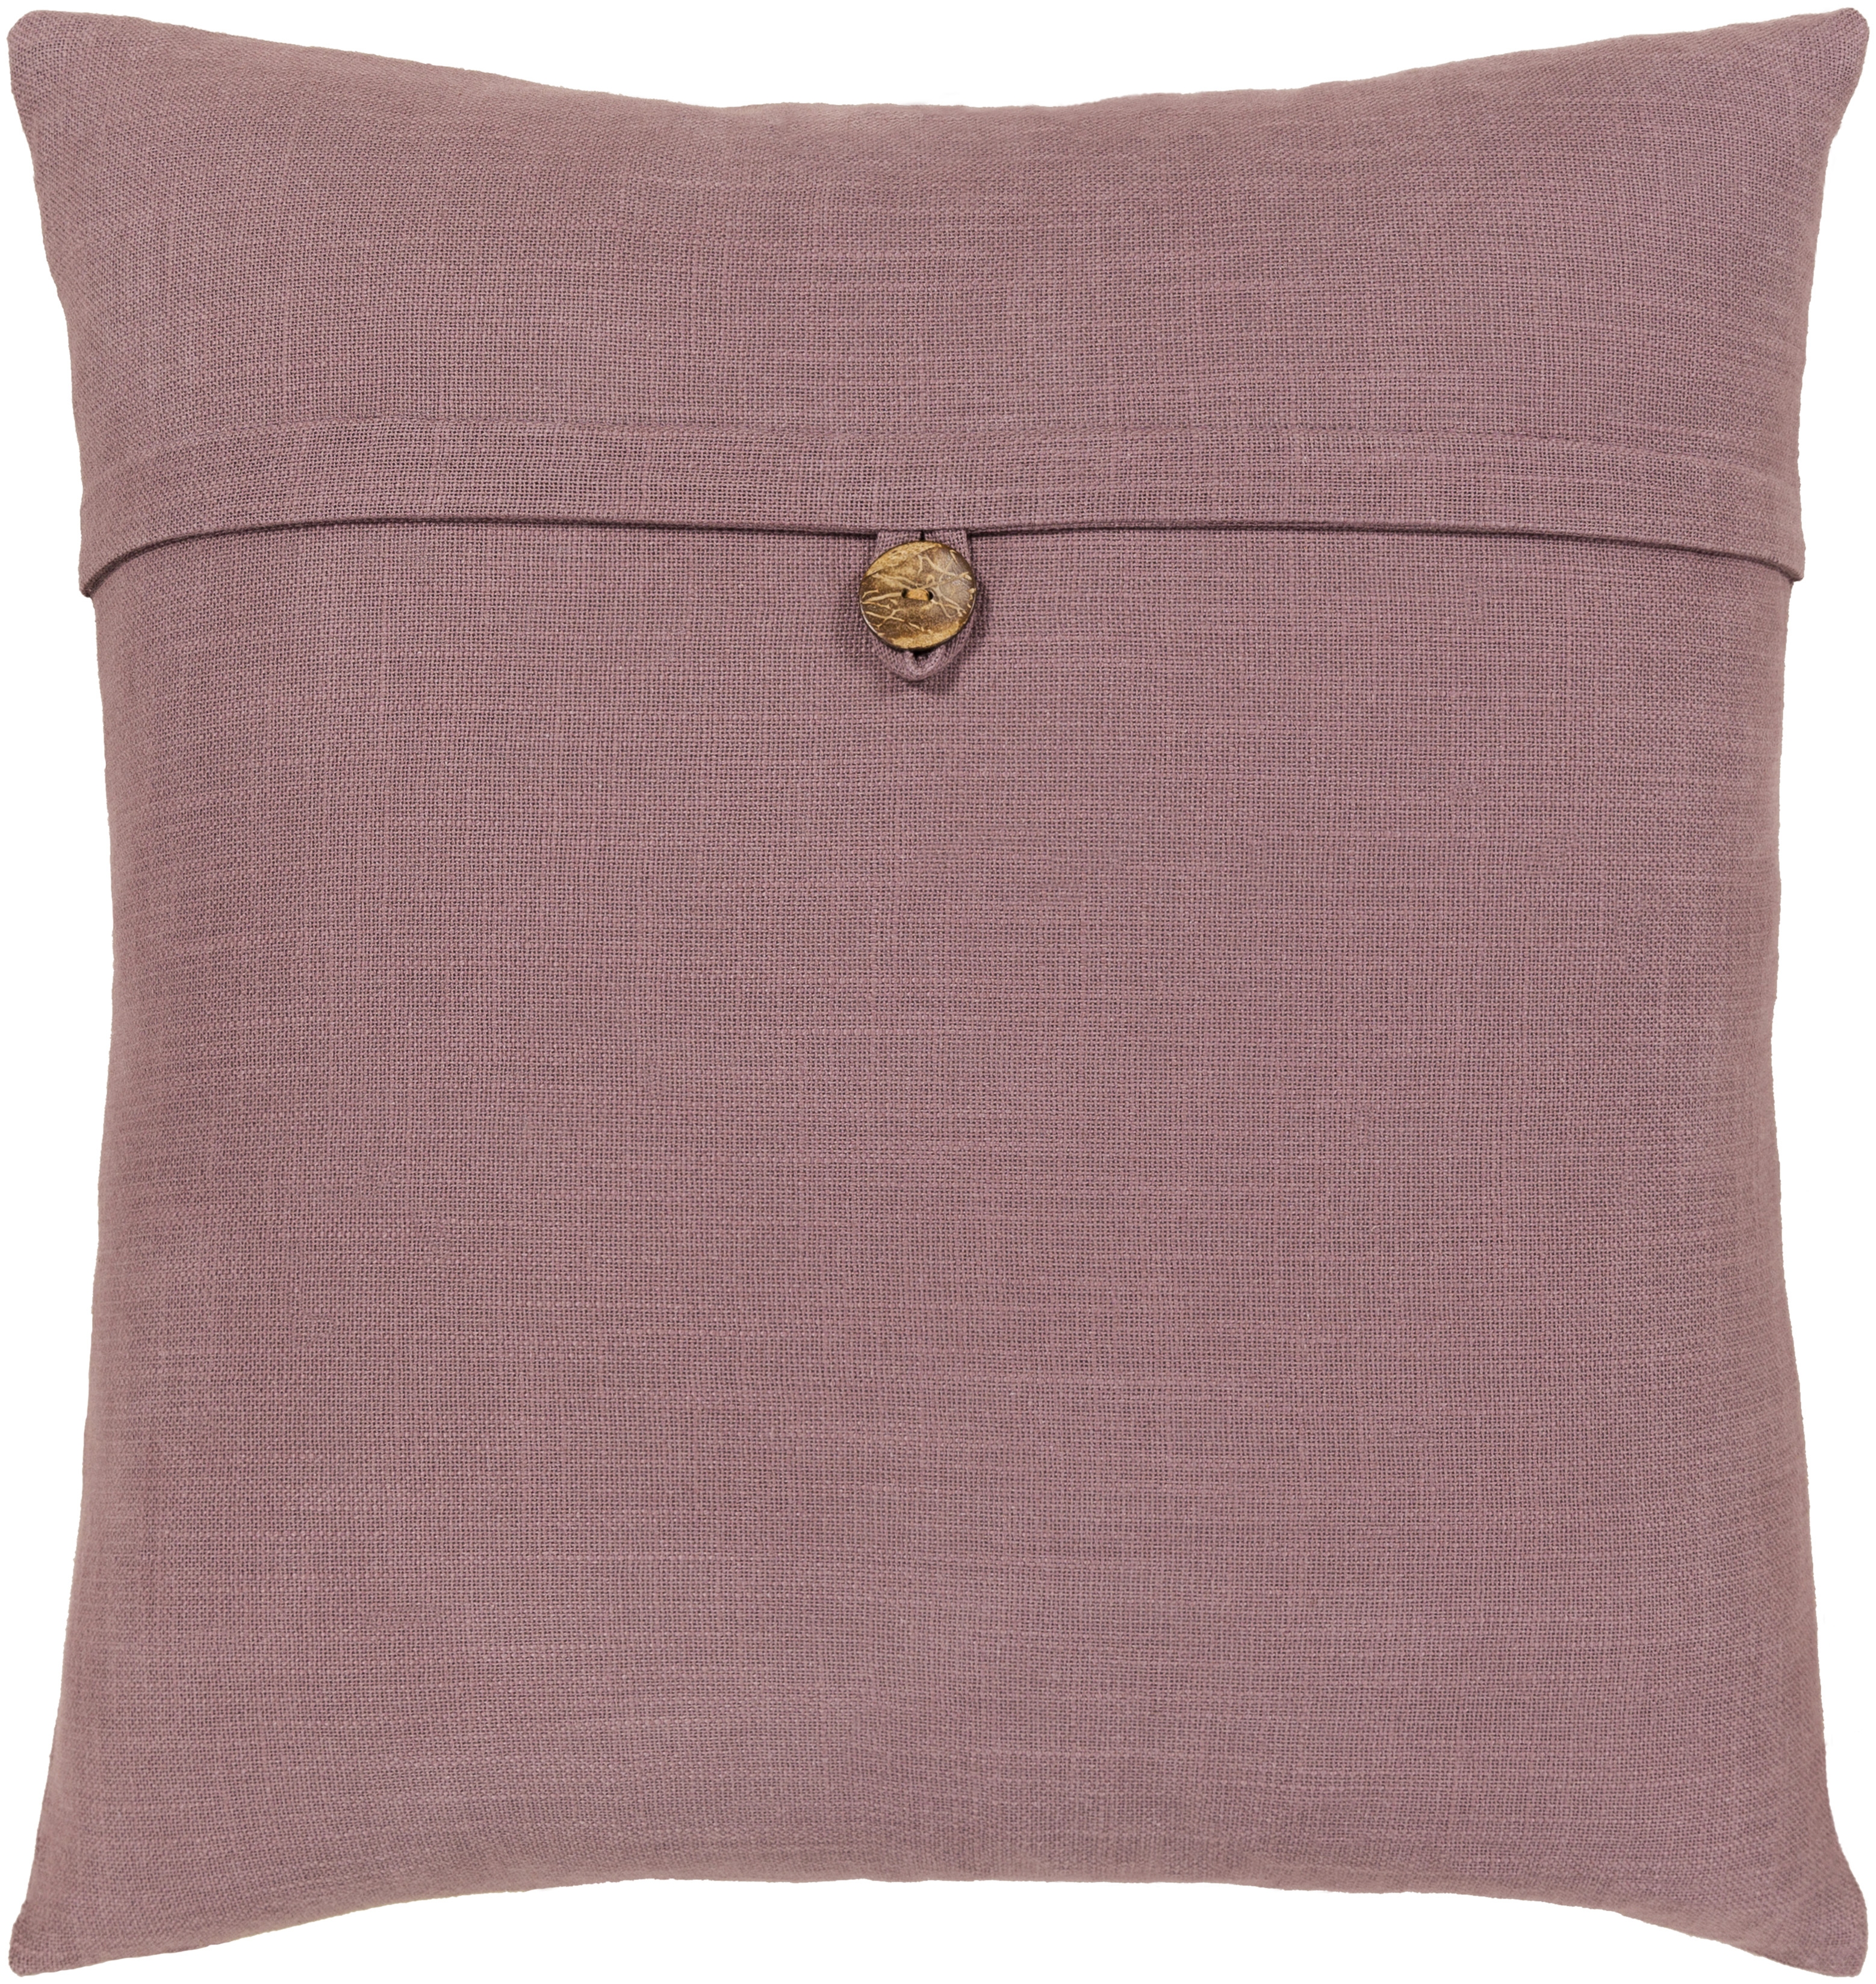 Penelope - PLP-007 - 20" x 20" - pillow cover only - Image 0